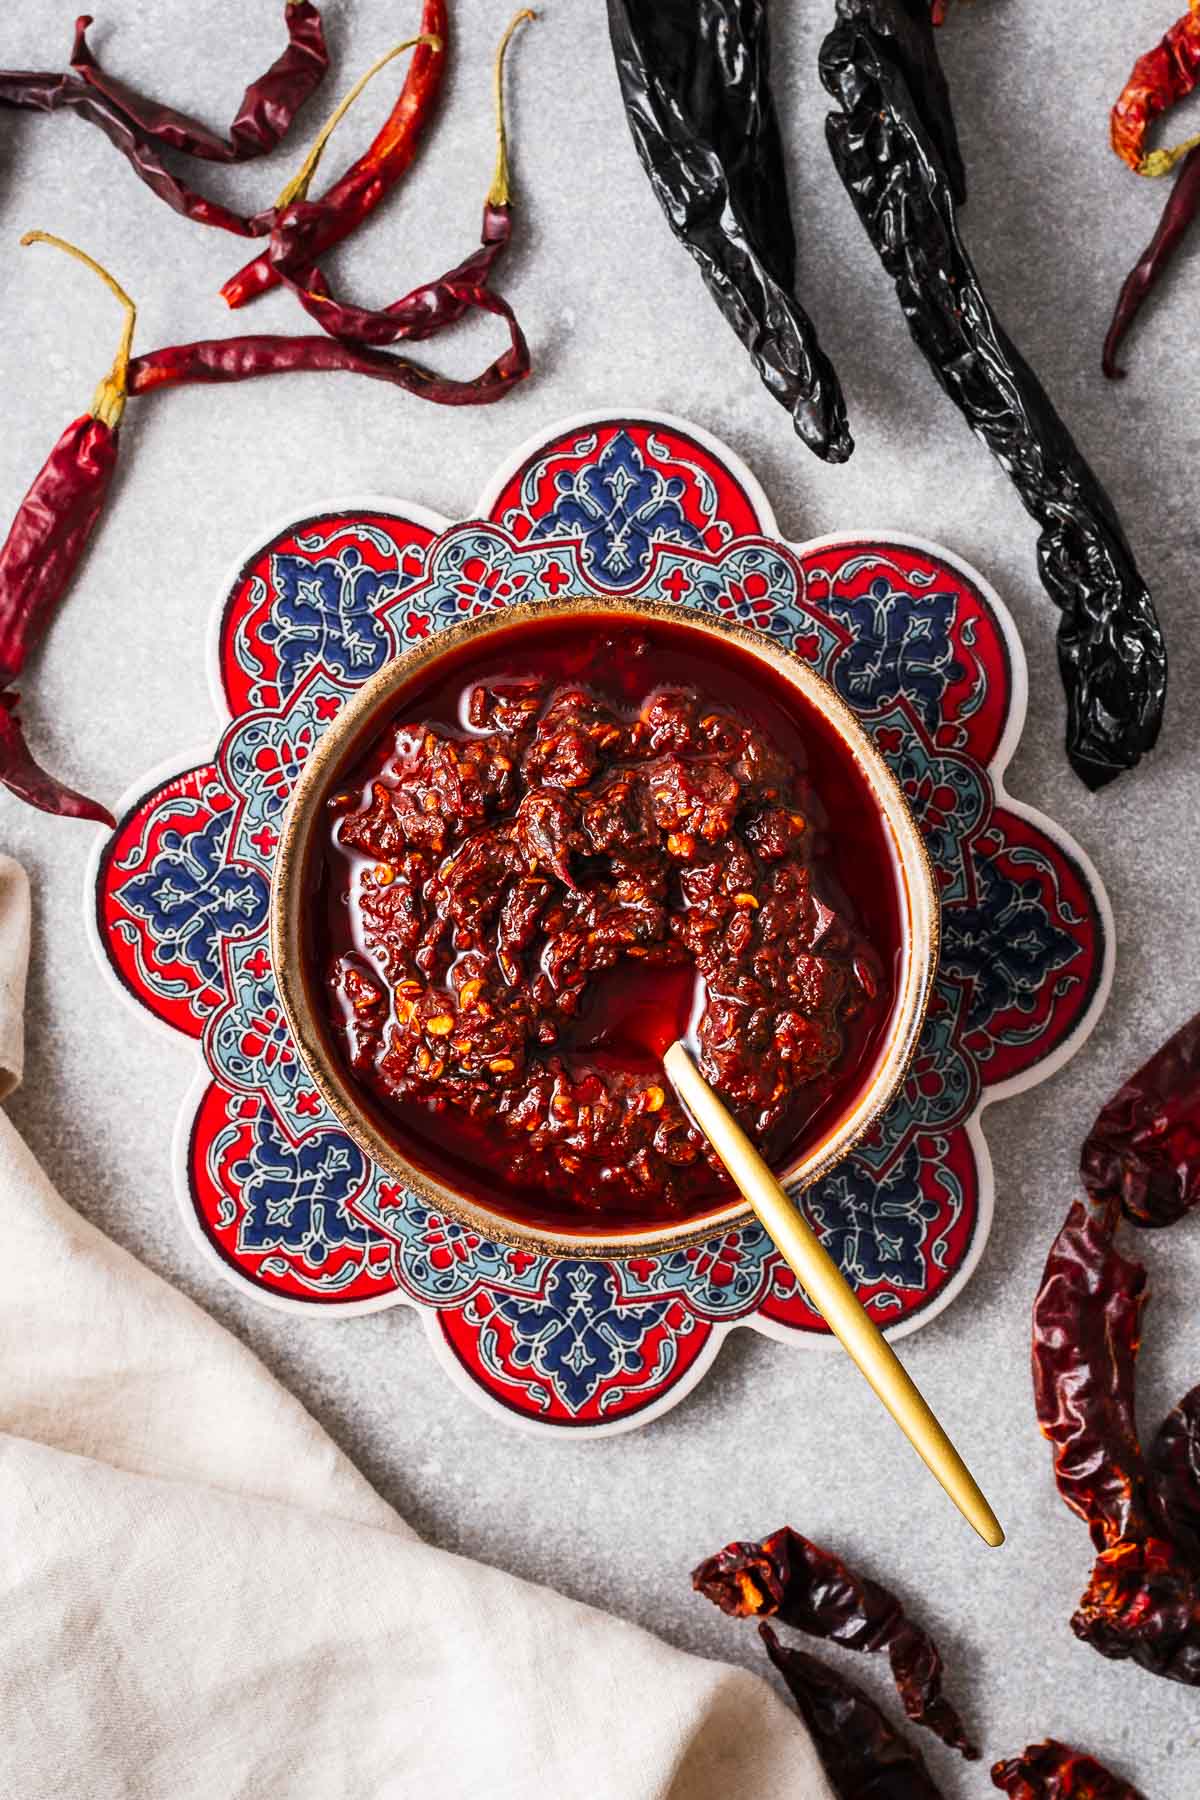 Homemade harissa paste in a small bowl surrounded by different types of dried chile peppers.